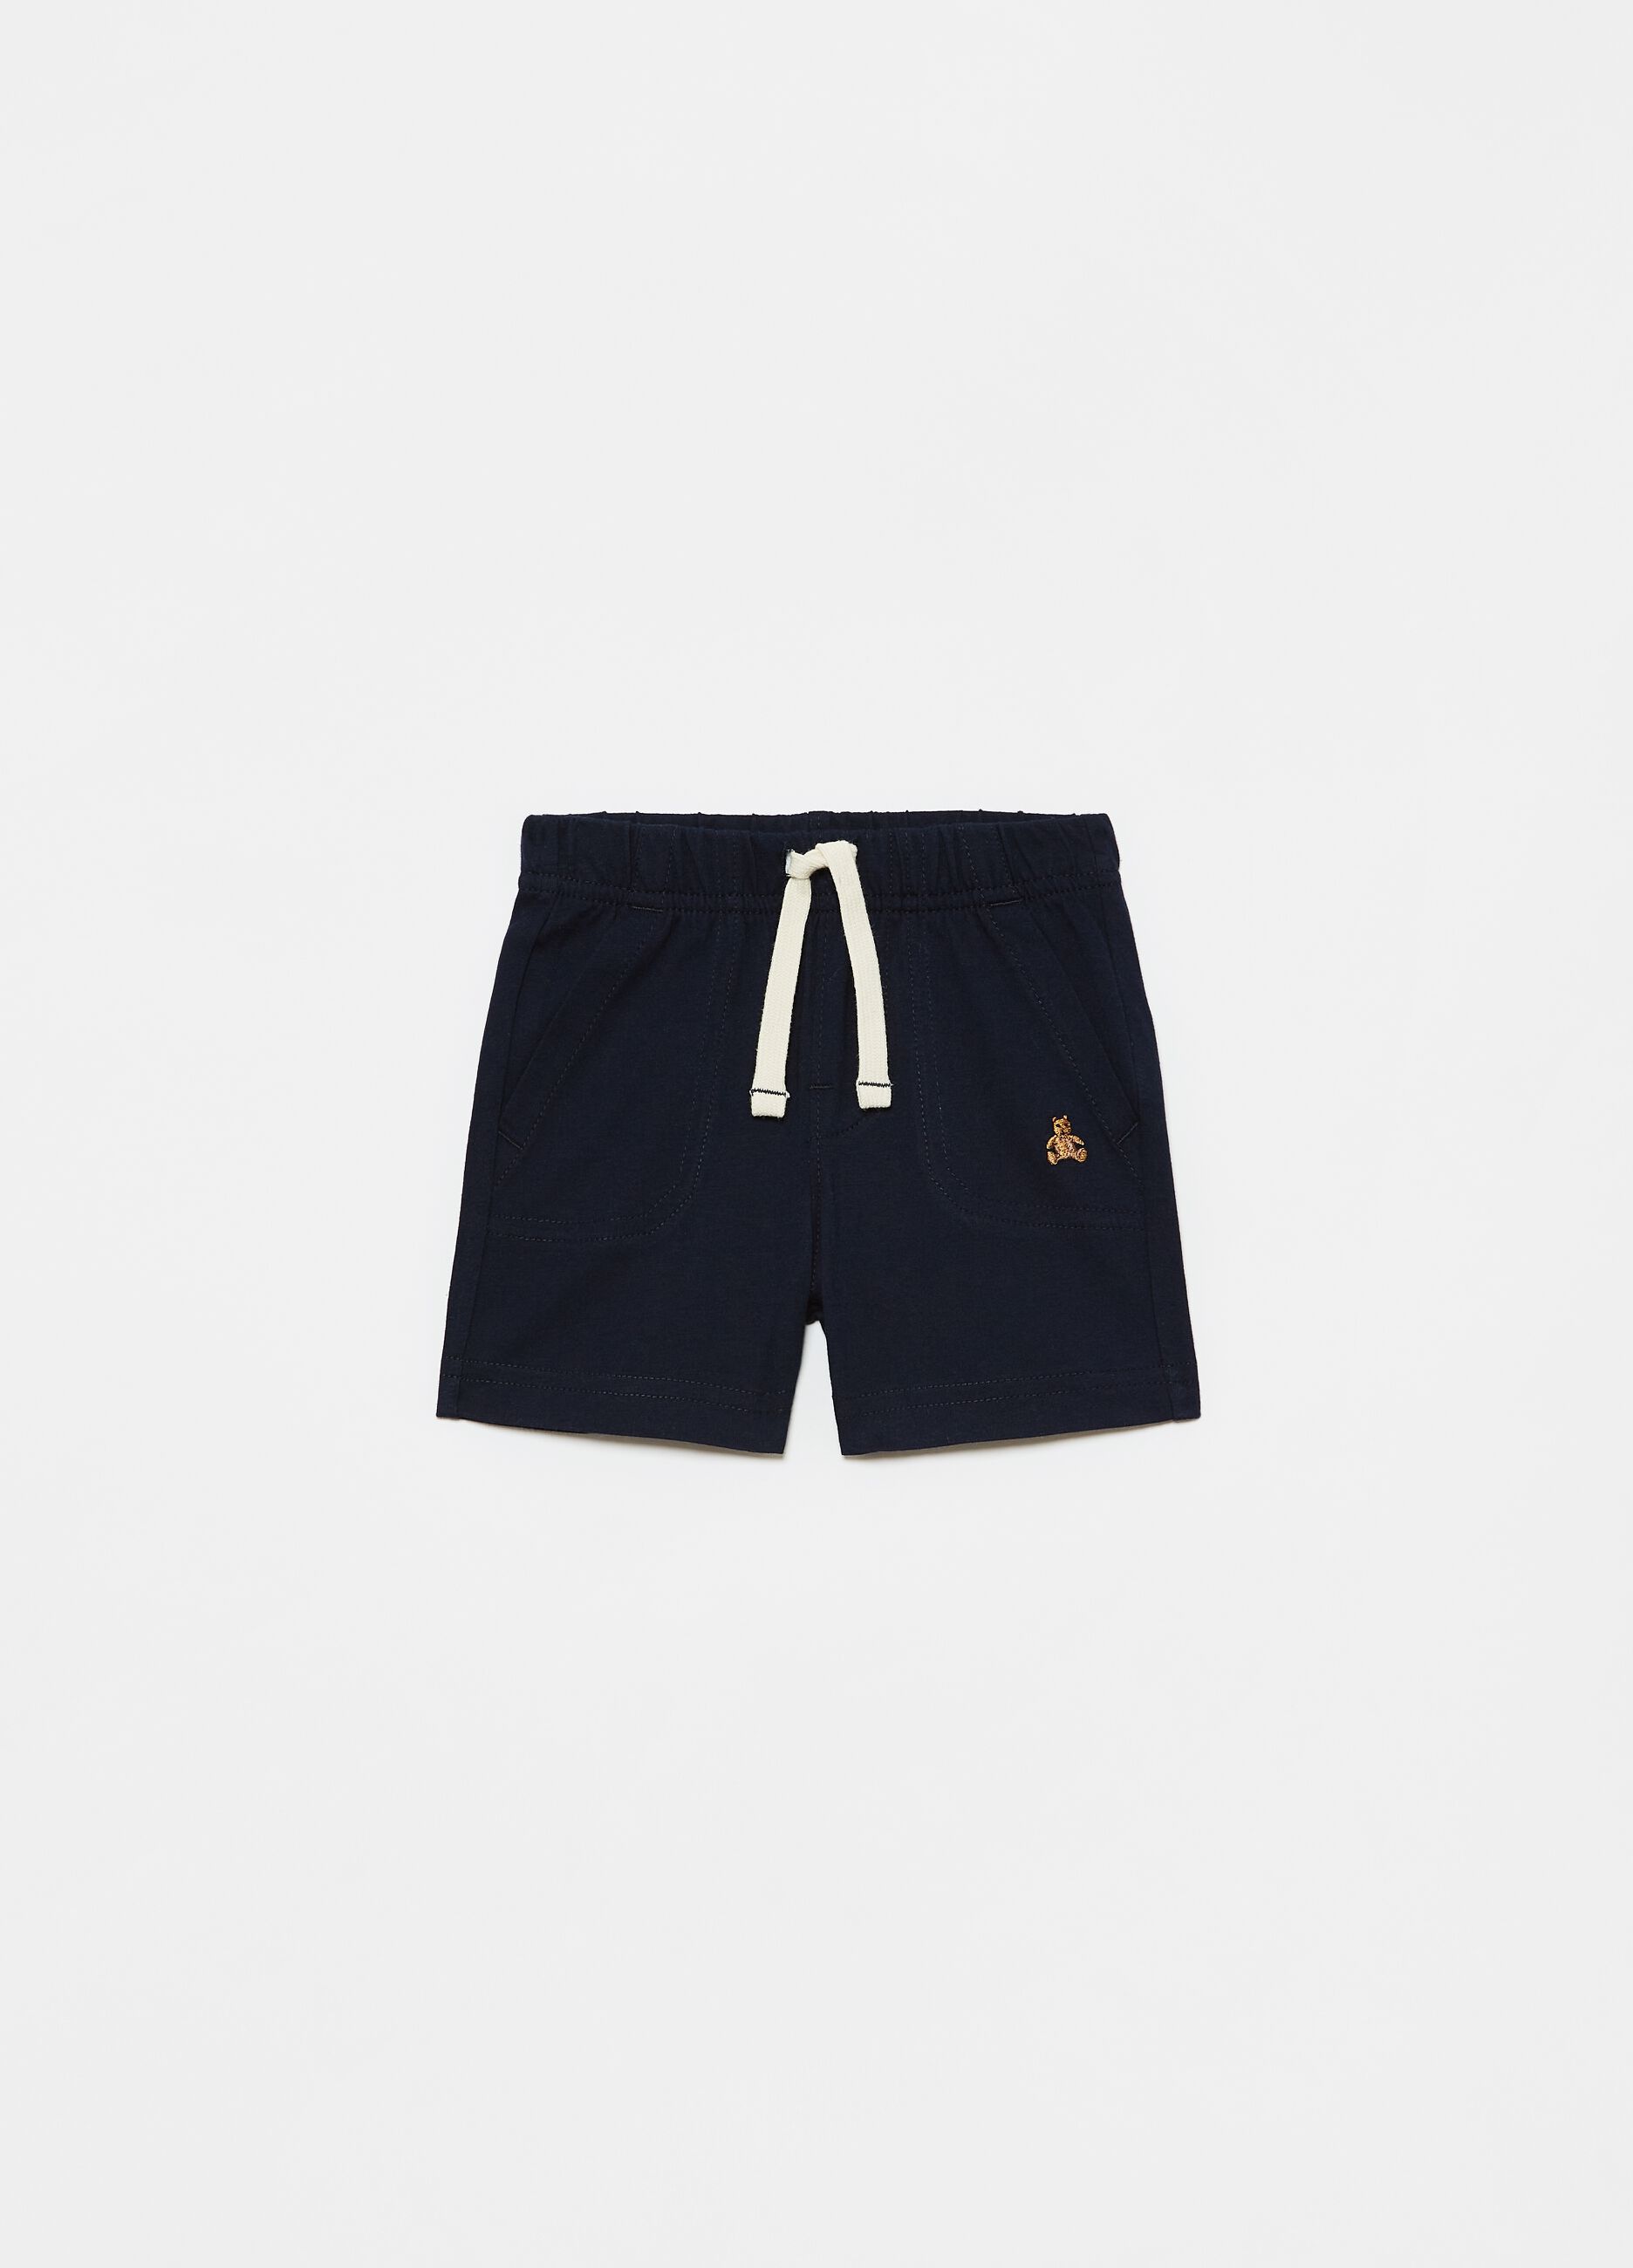 Cotton shorts with teddy bear embroidery